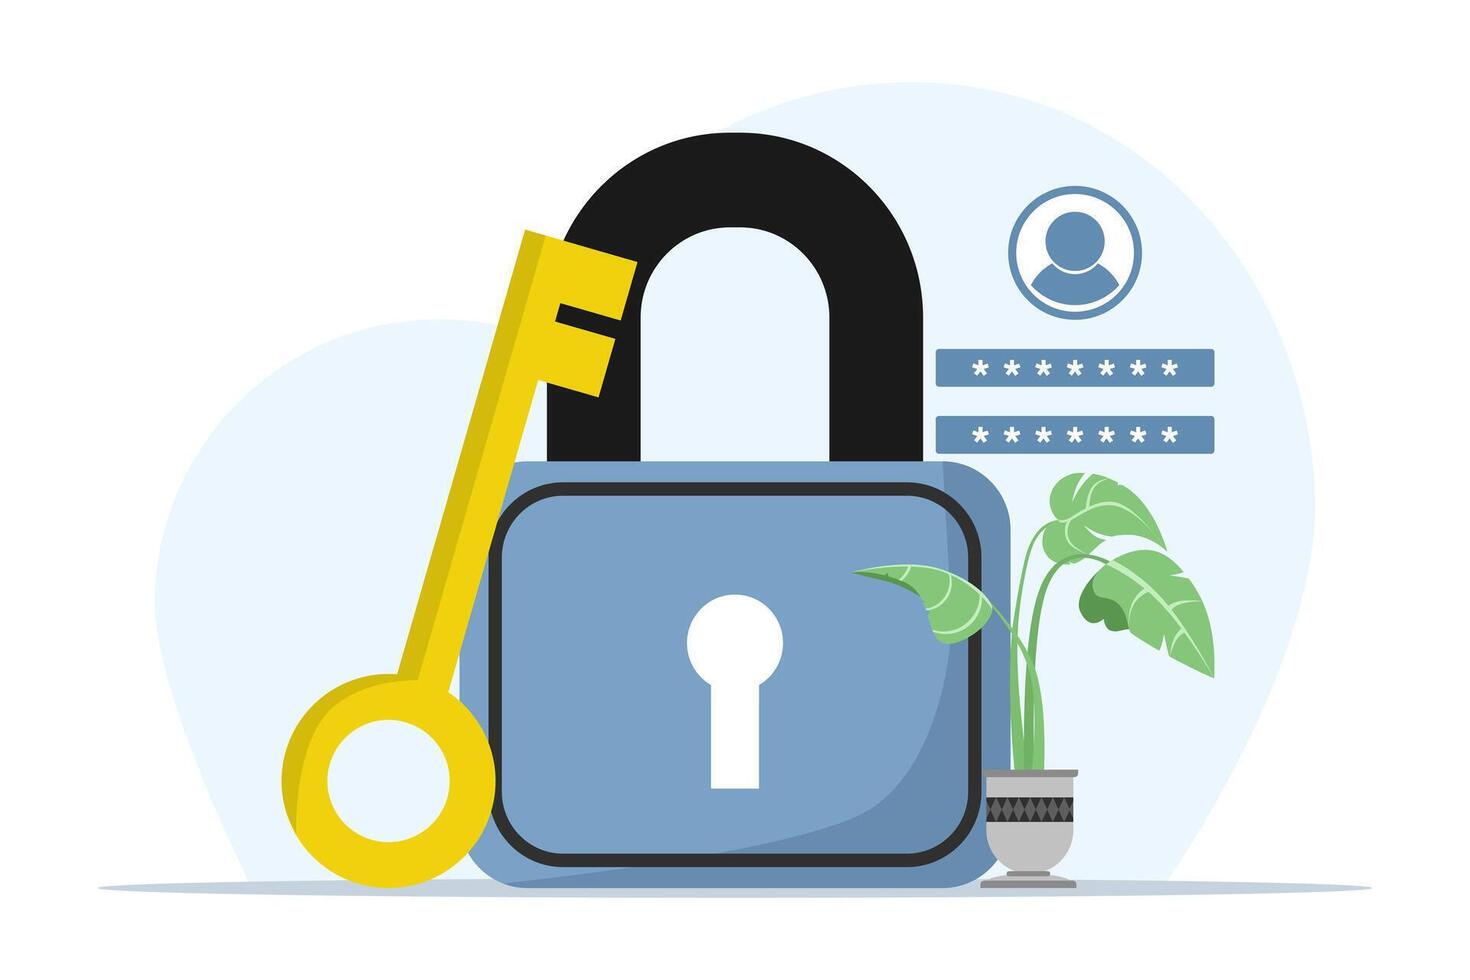 concept of personal data security, online cyber data security, data management and data protection from hacker attacks and padlock icon, internet technology network. flat illustration. vector